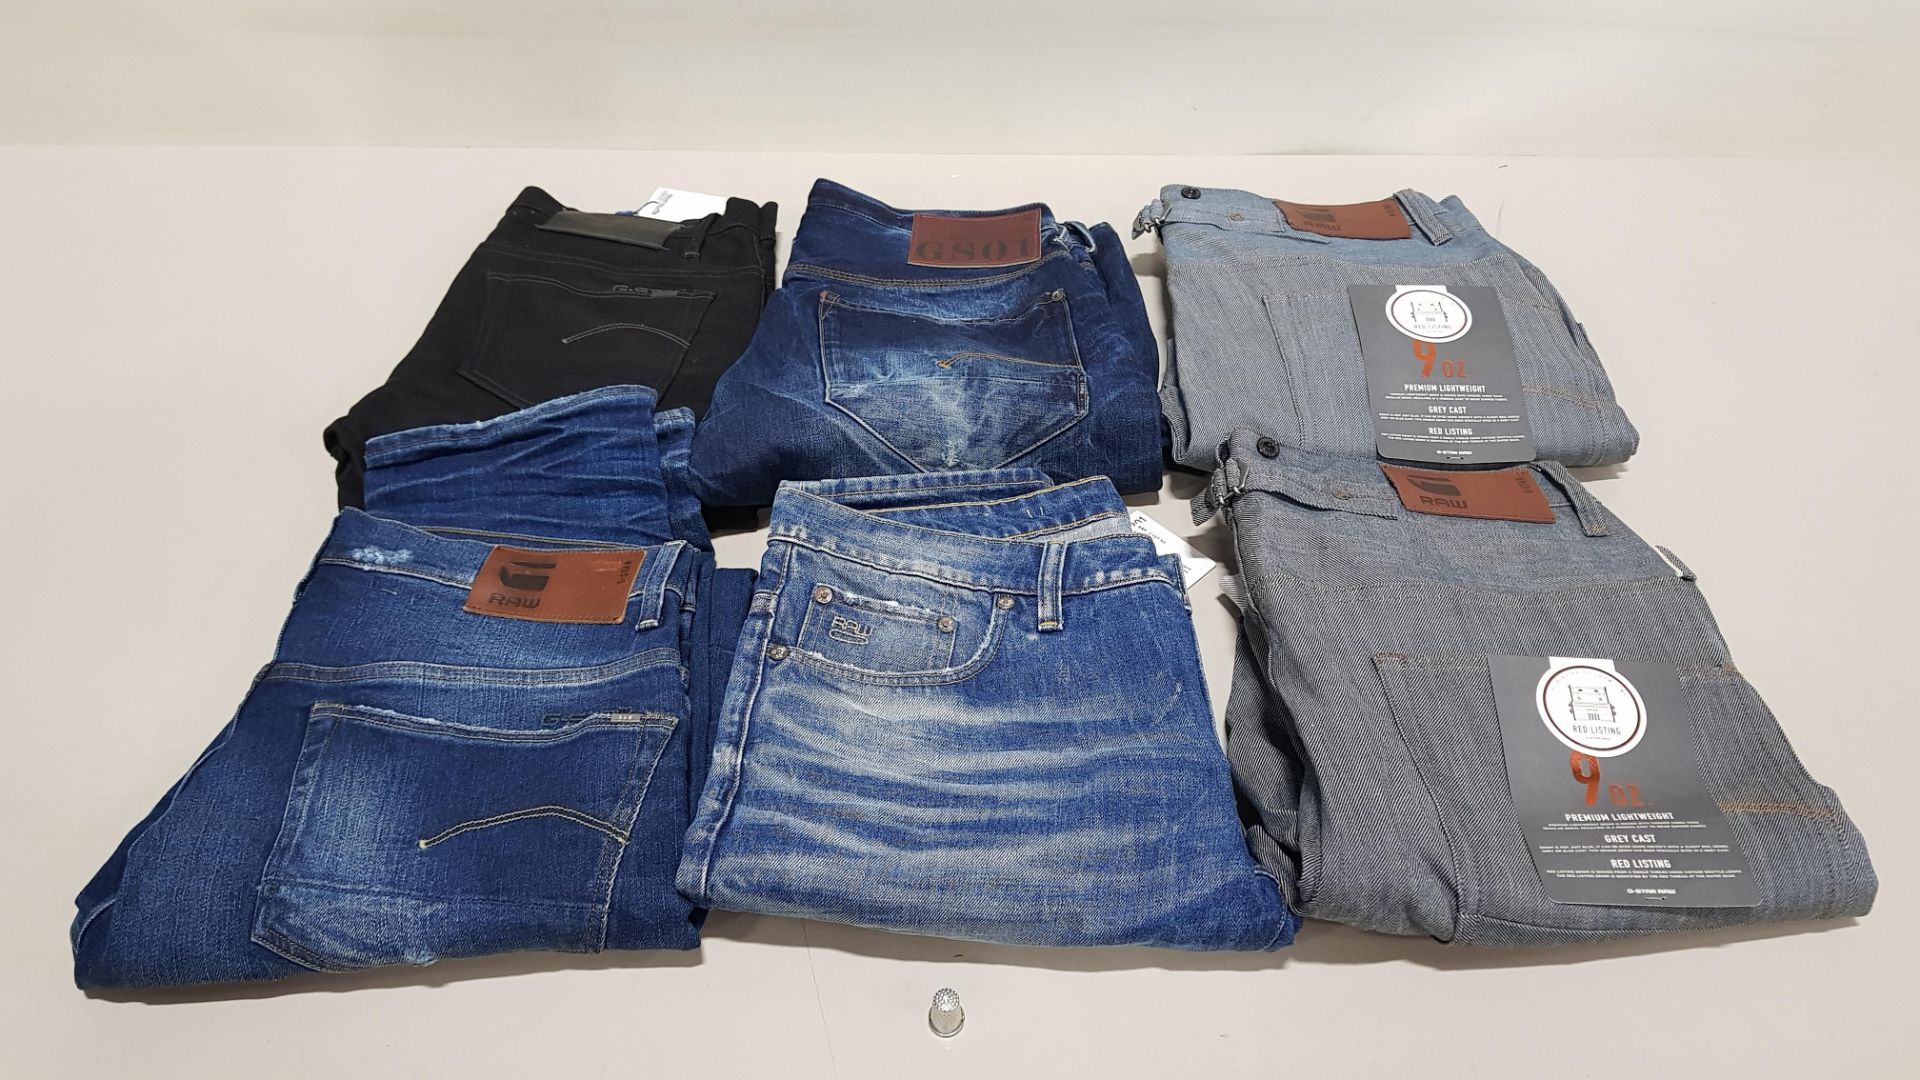 6 X PAIRS OF BRAND NEW G-STAR RAW JEANS IN VARIOUS STYLES & COLOURS IE. LIGHT BLUE, DARK BLUE,